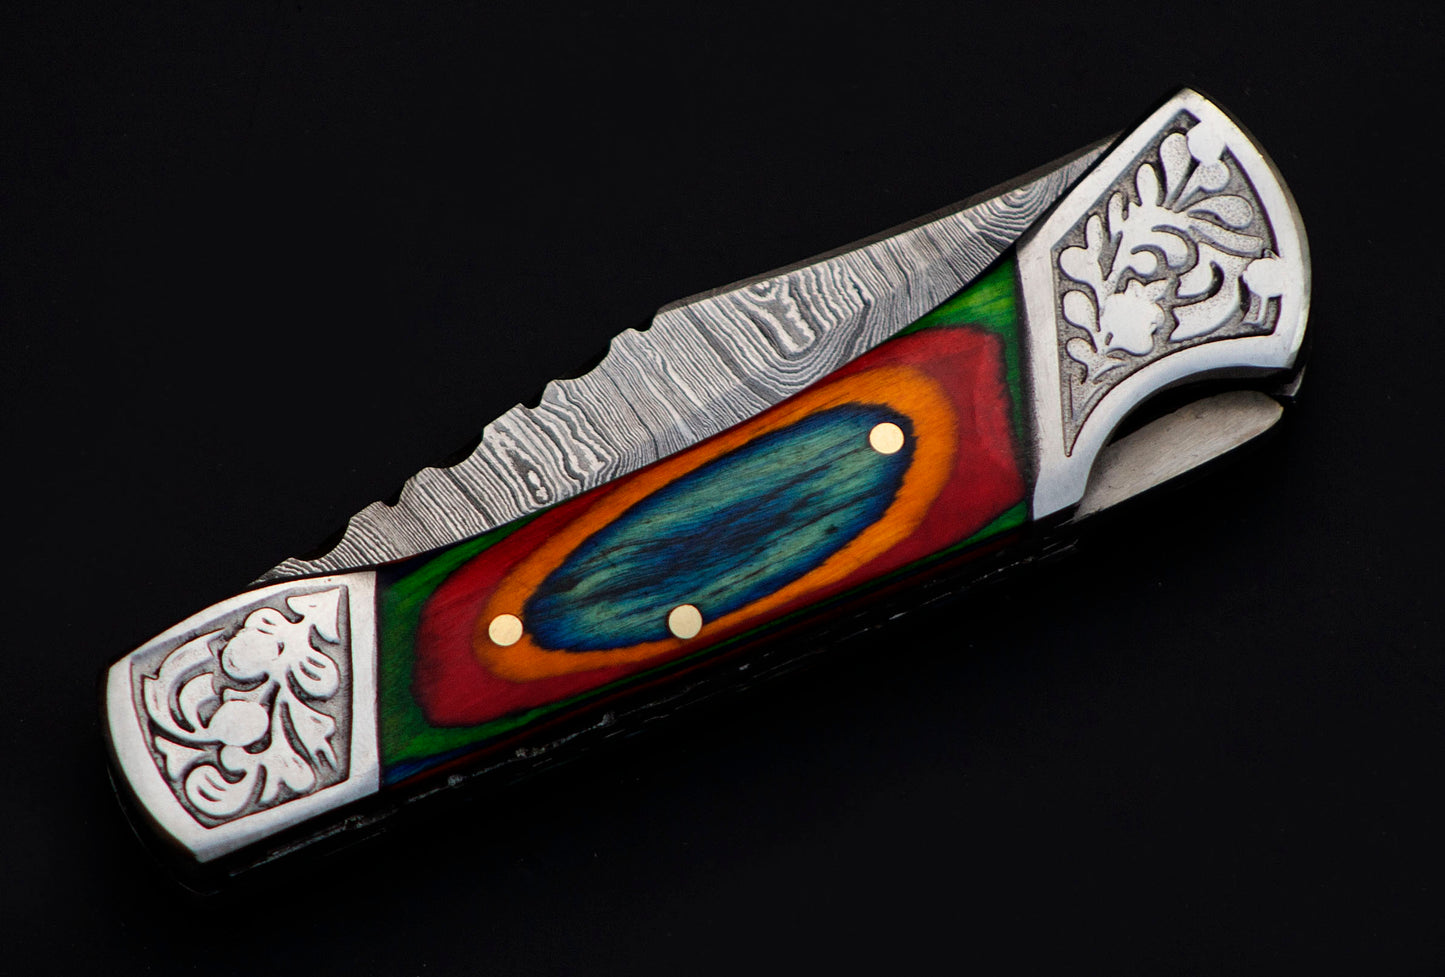 Copy of 7" long back lock Folding Knife, Blue & Orange colored wood Scale with Engraved steel bolster, custom made 3.25" Hand Forged Damascus steel blade, Cow hide leather sheath with belt loop